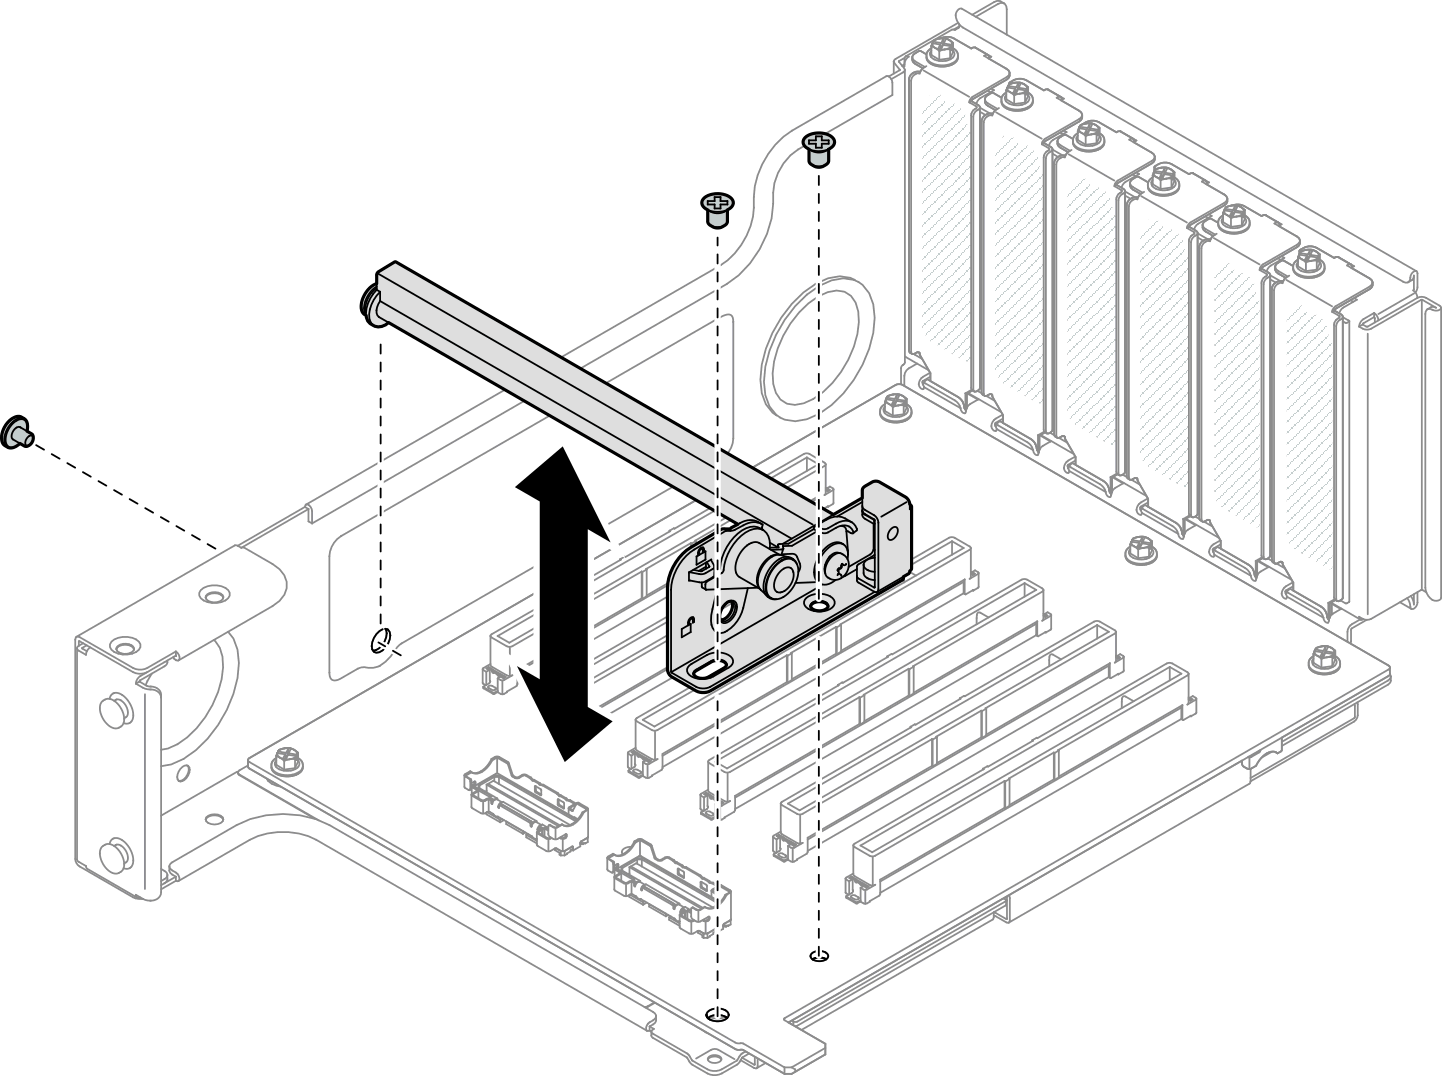 Removing PCIe retainer from riser